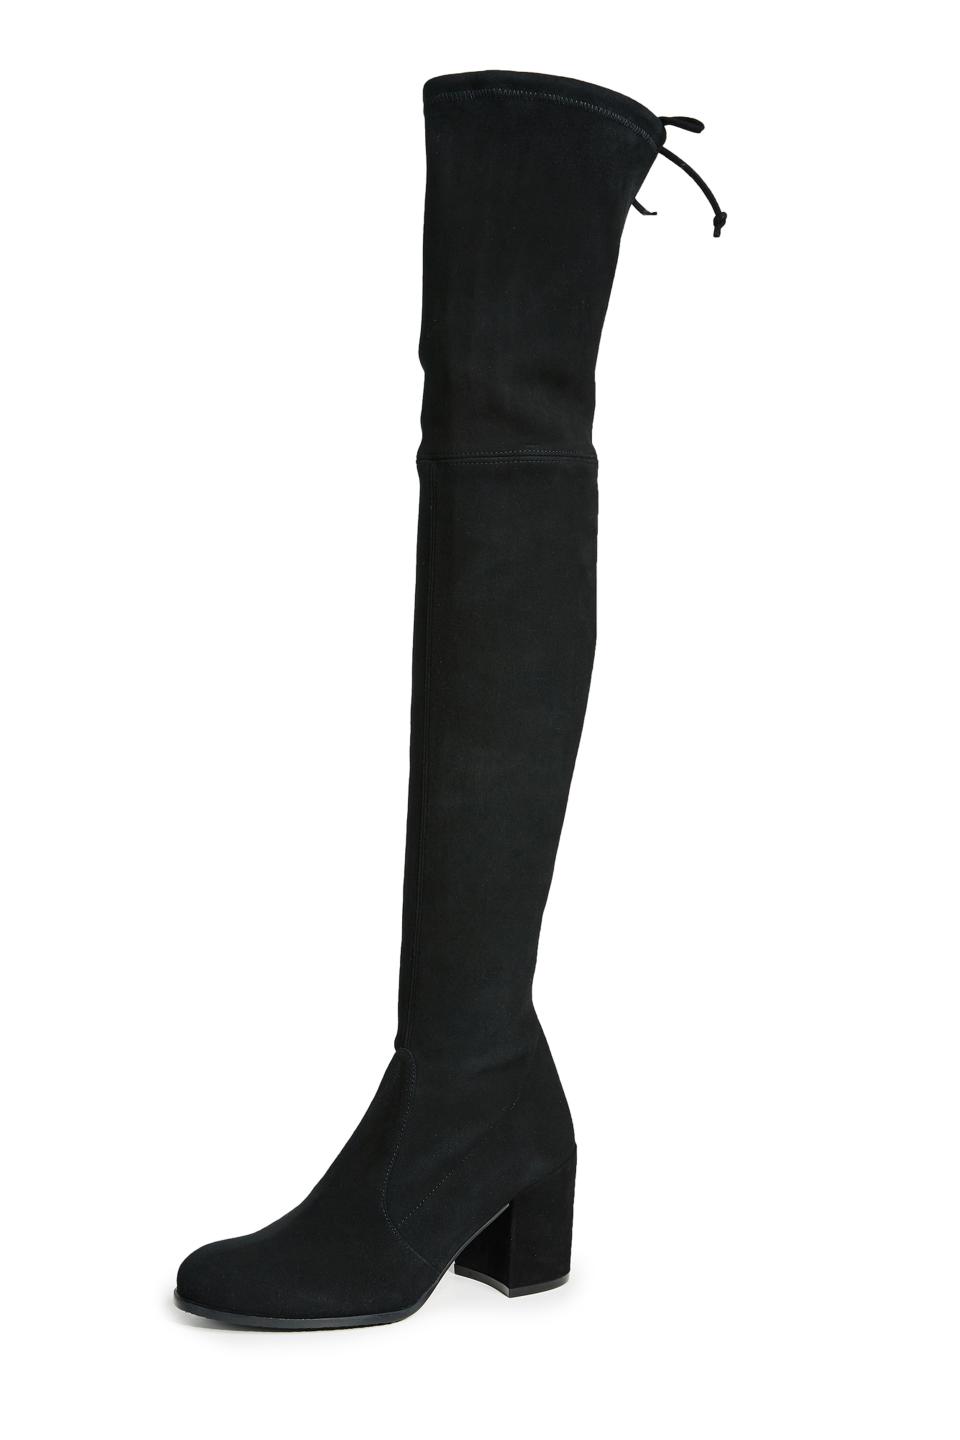 Tieland Over the Knee Boots